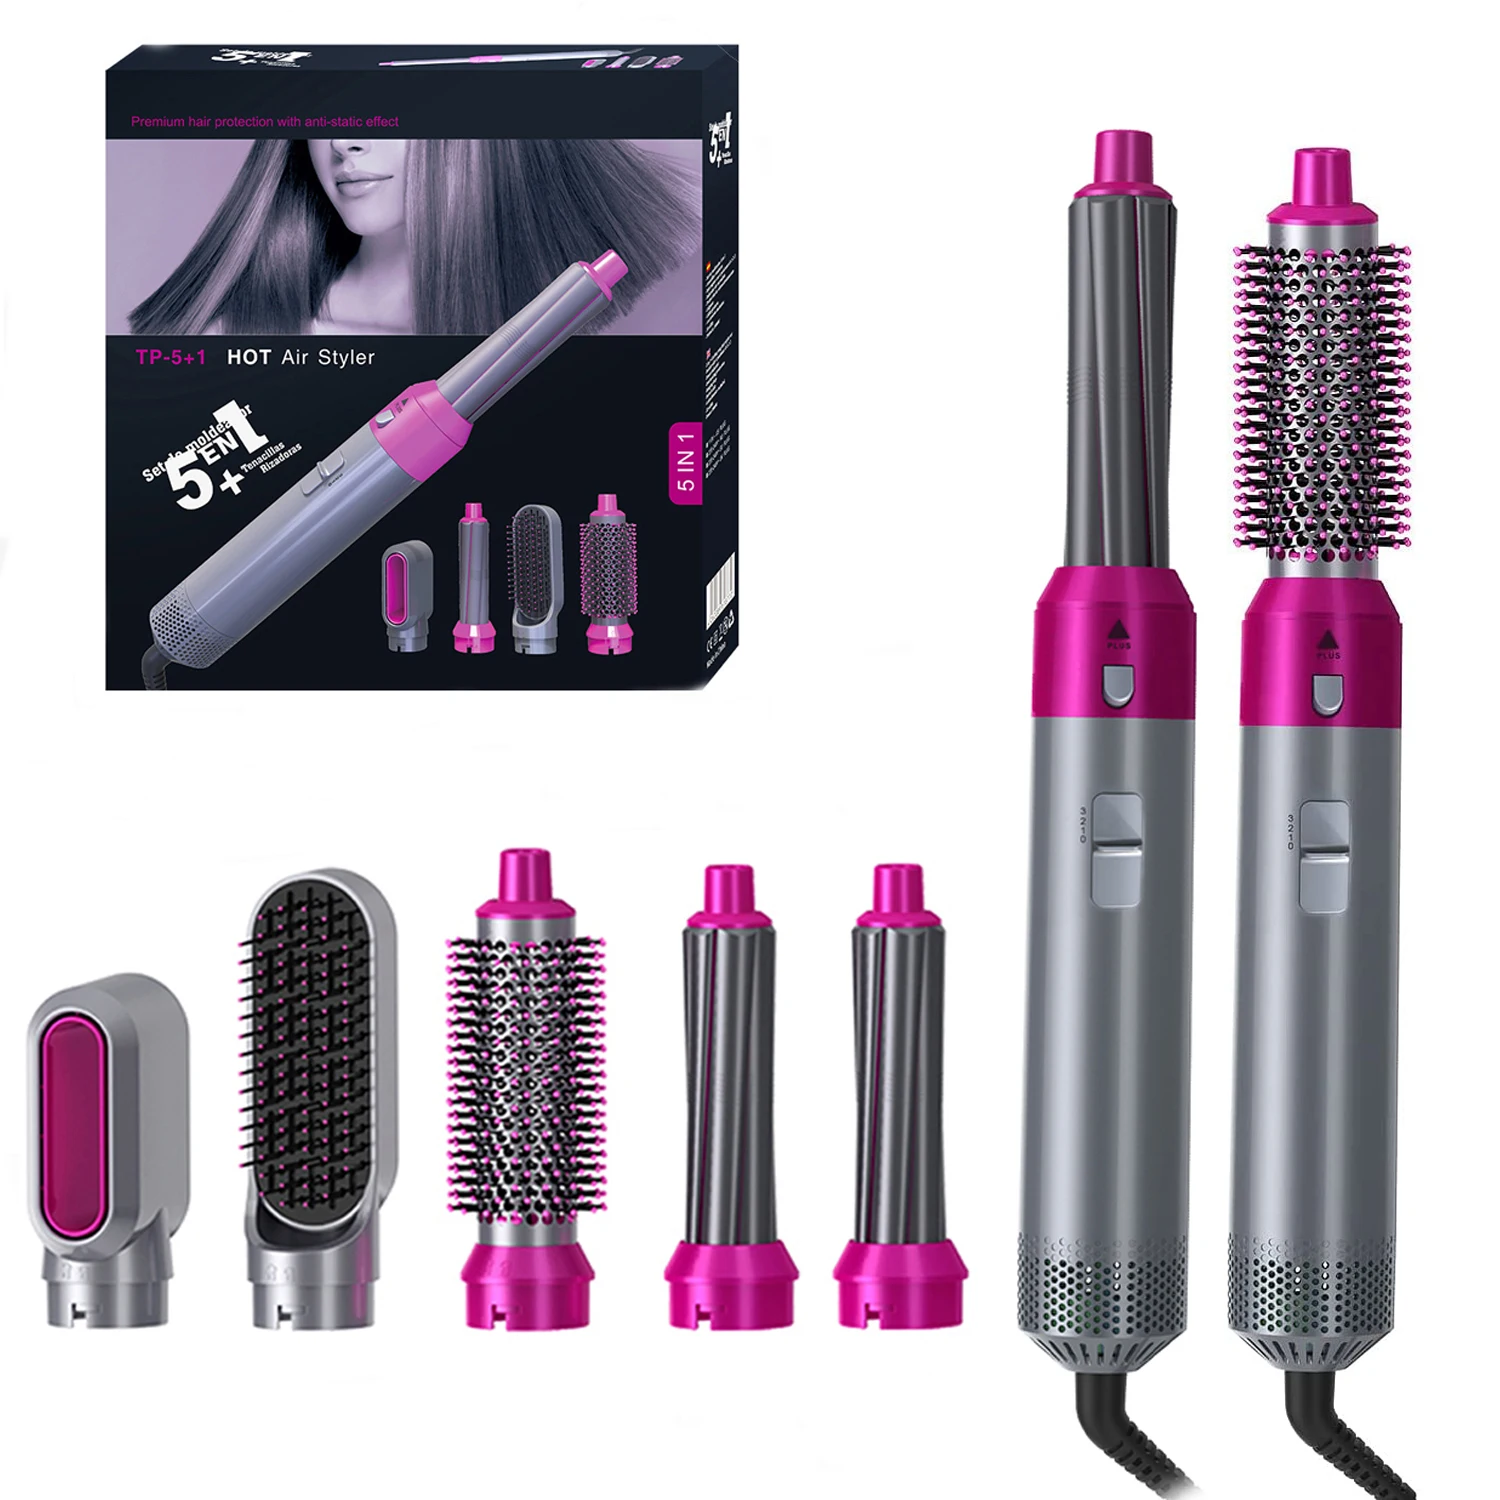 Hair Dryer 5 in 1 Set Hot Air Comb Professional Curling Iron Hair Straightener Styling Tool Househol